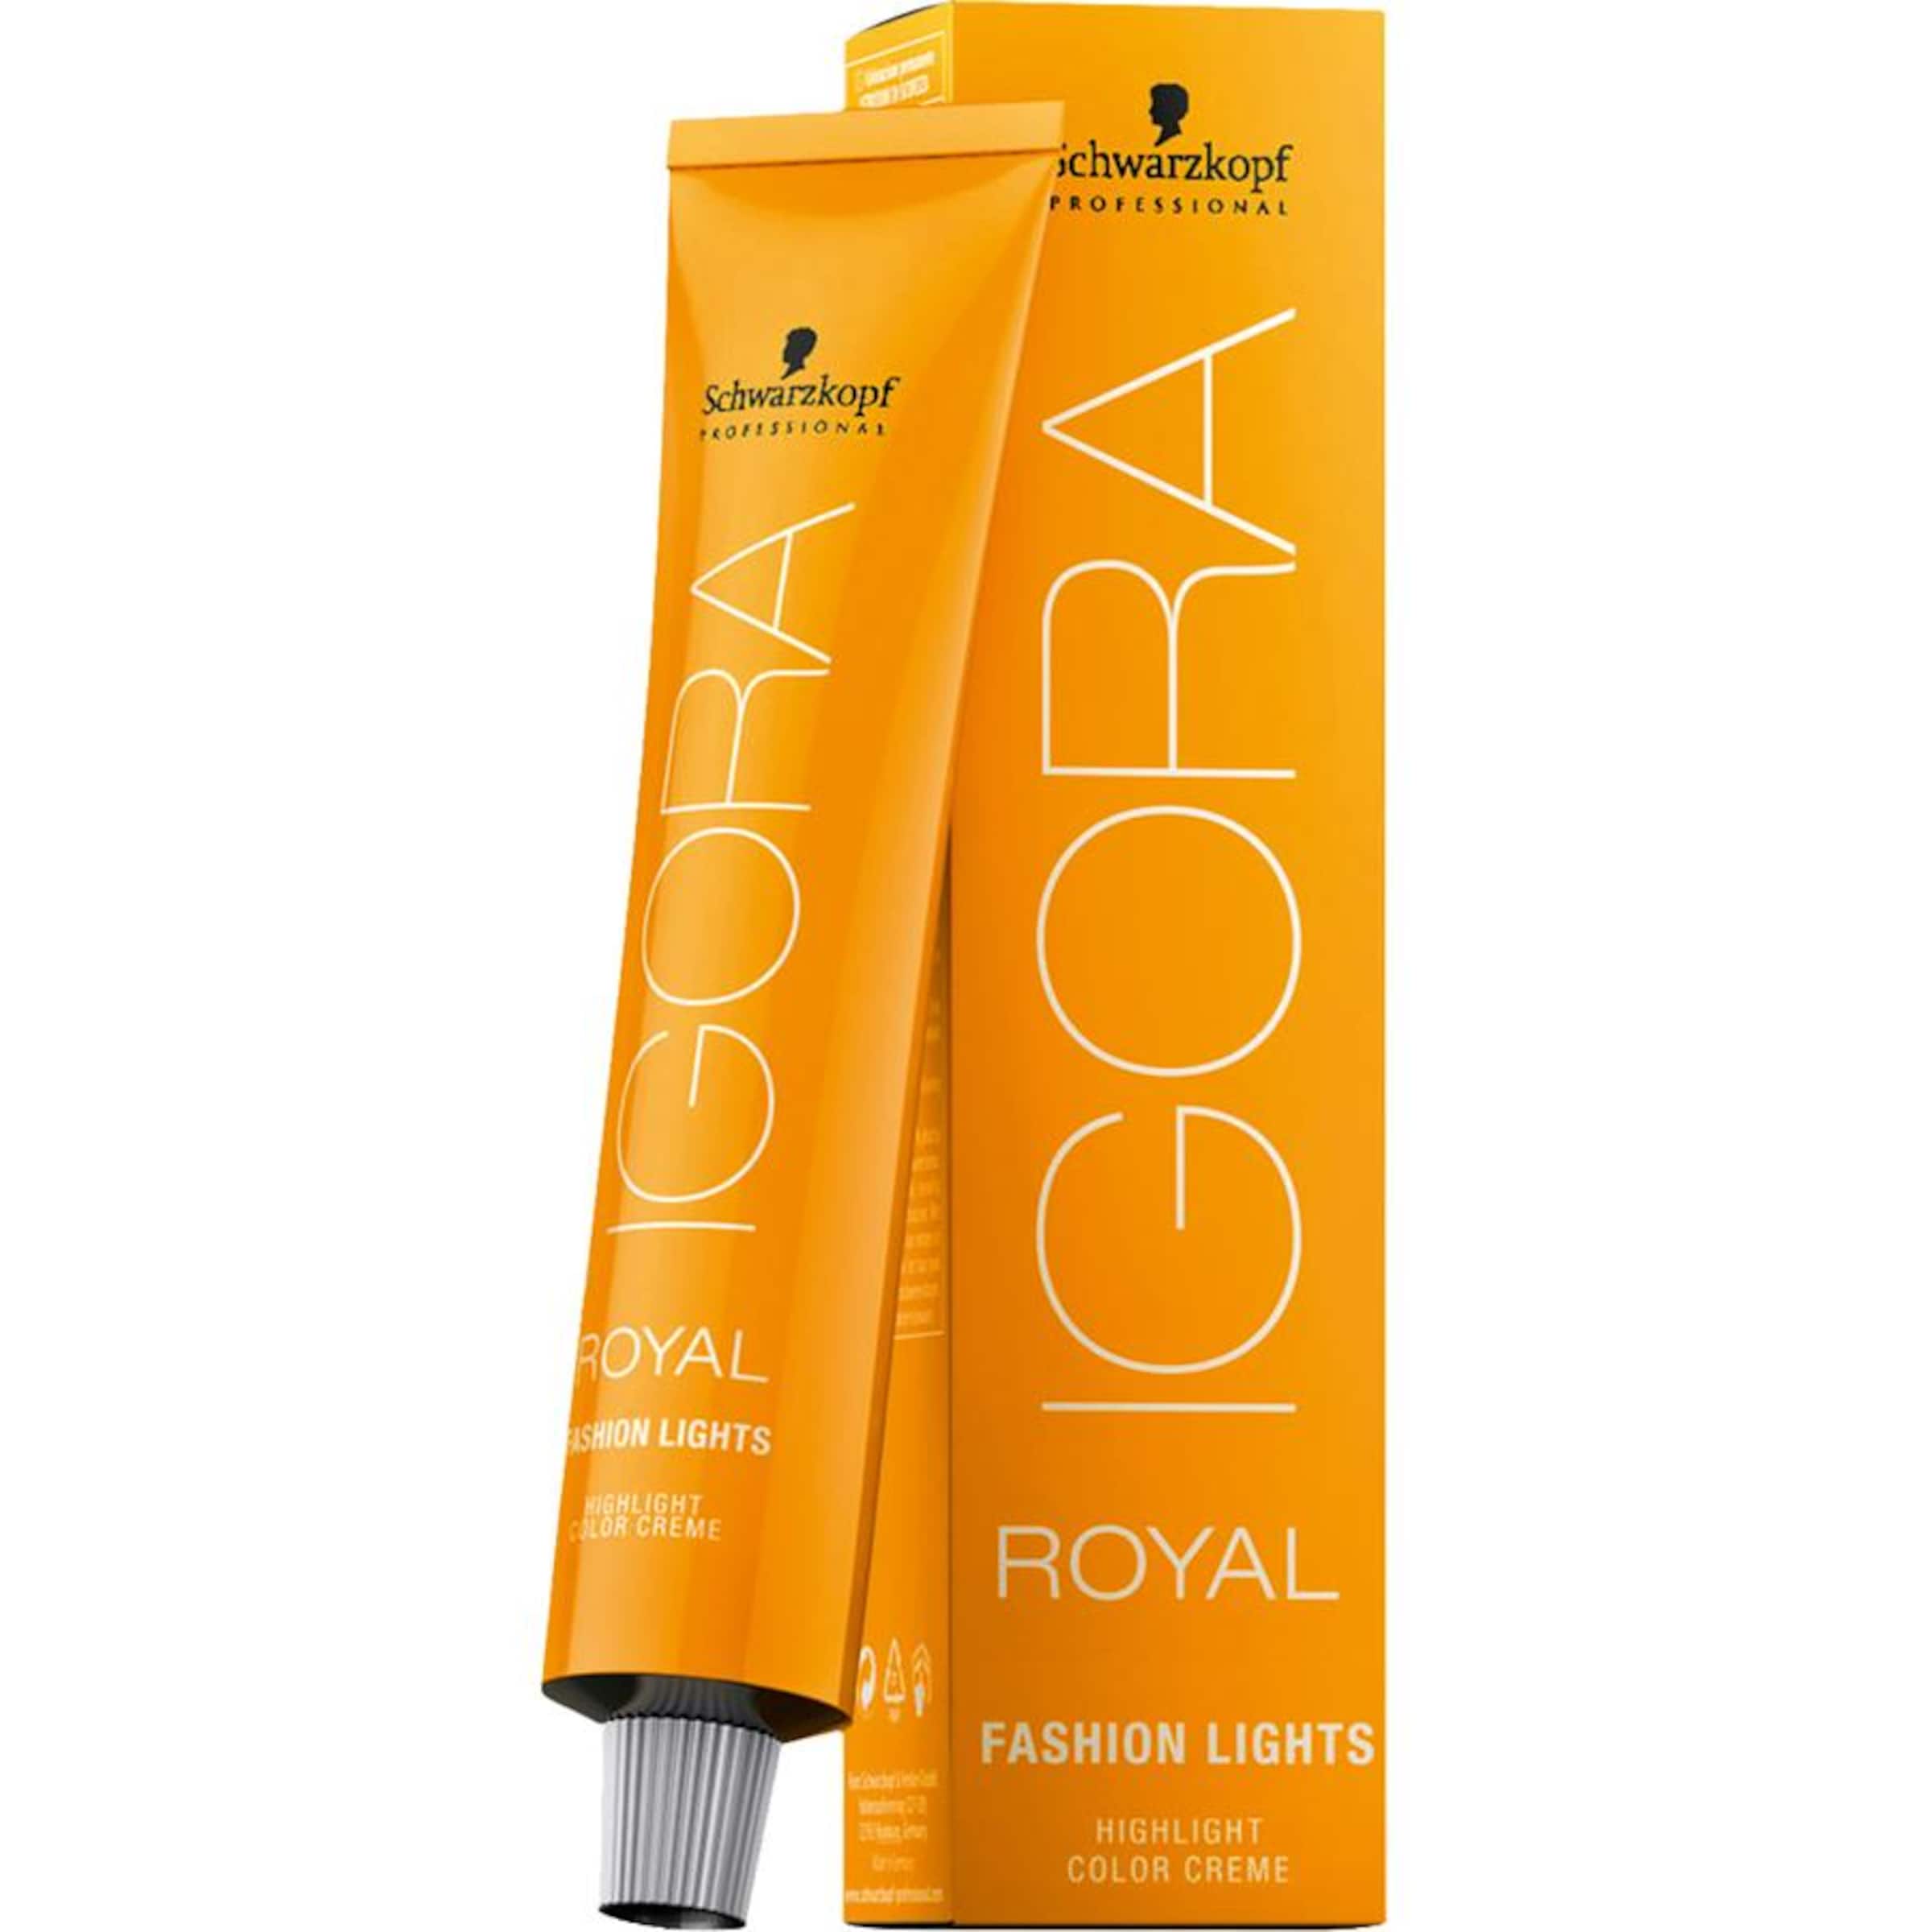 Schwarzkopf Professional Haarfarbe Fashion Lights Highlight Color Creme in Lila 